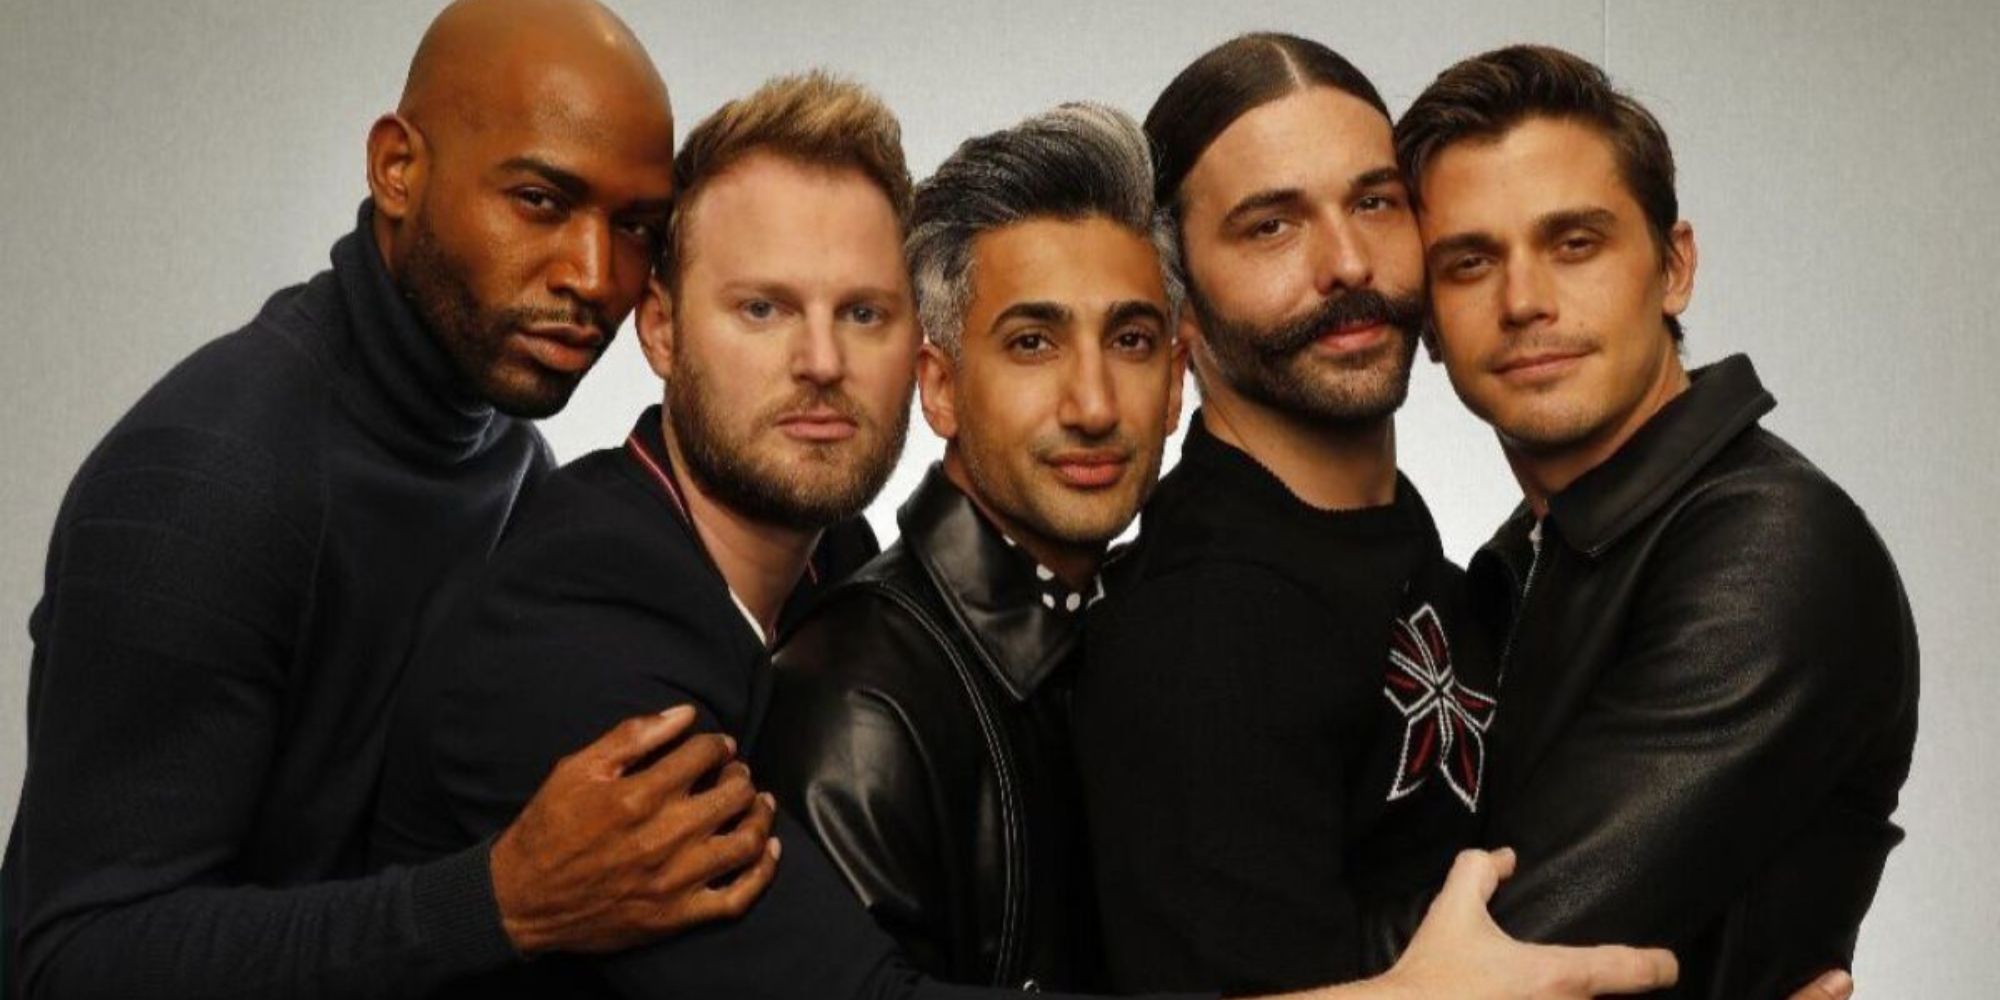 ‘Queer Eye for the Straight Guy’ (2003-2007) and ‘Queer Eye’ (2018-)